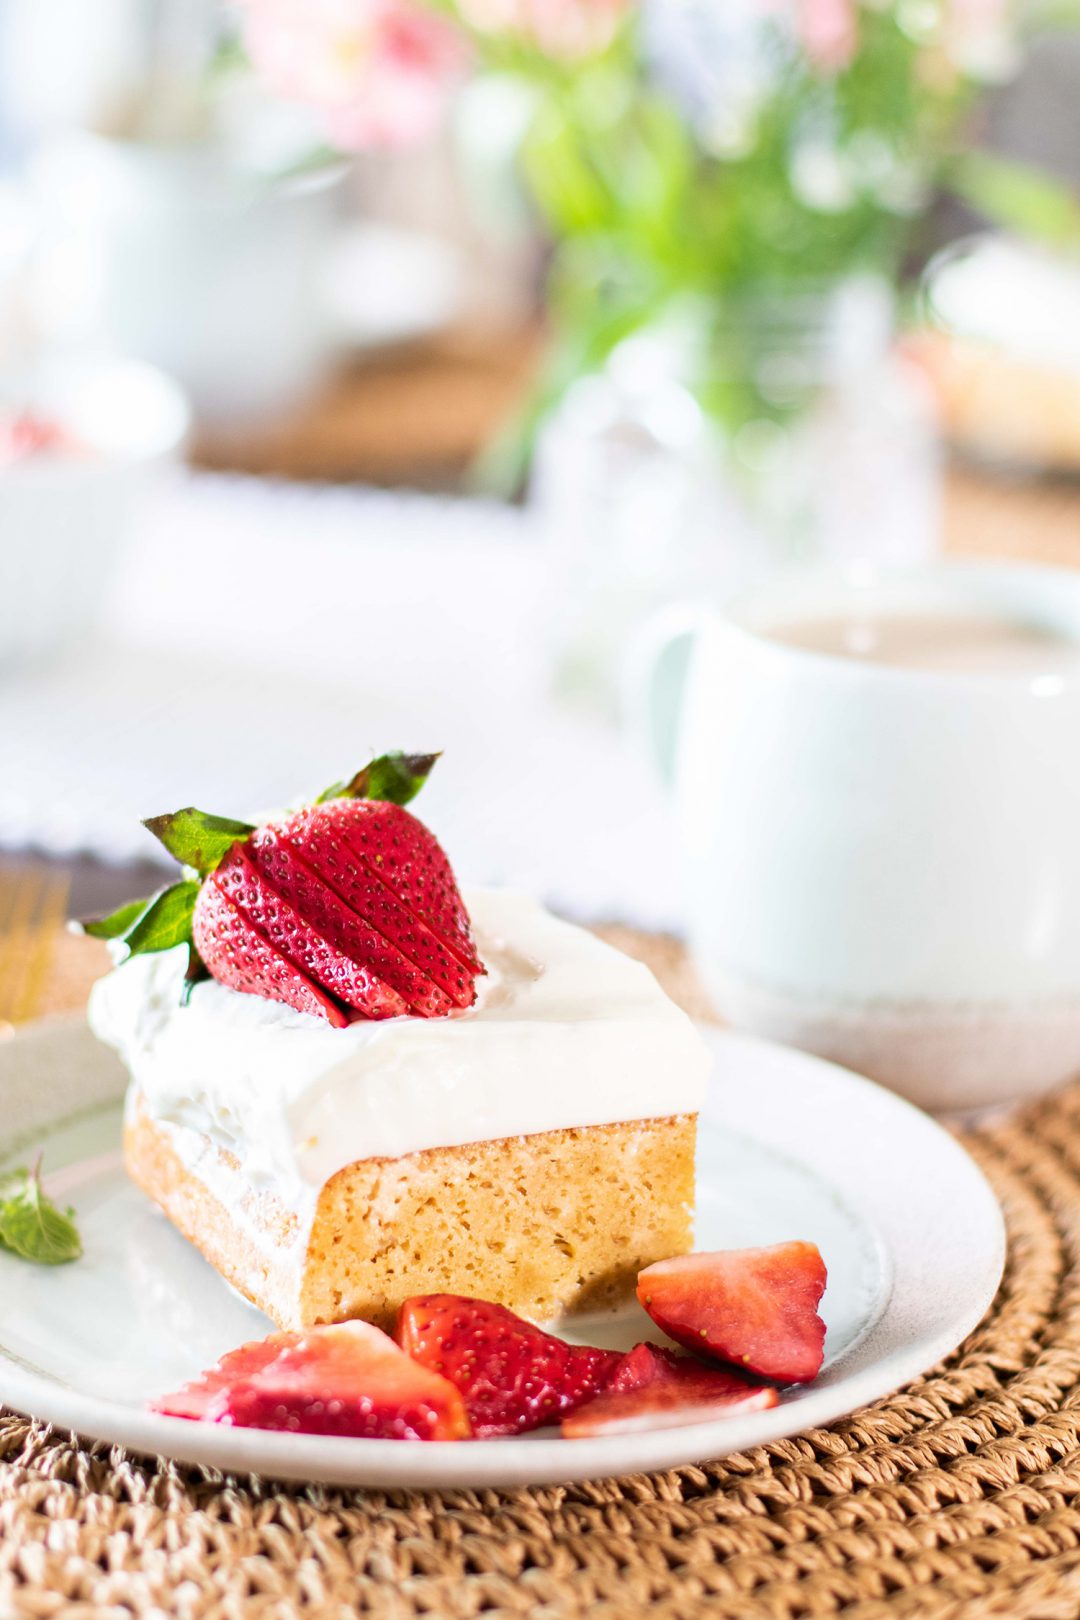 Tres leches cake with strawberries